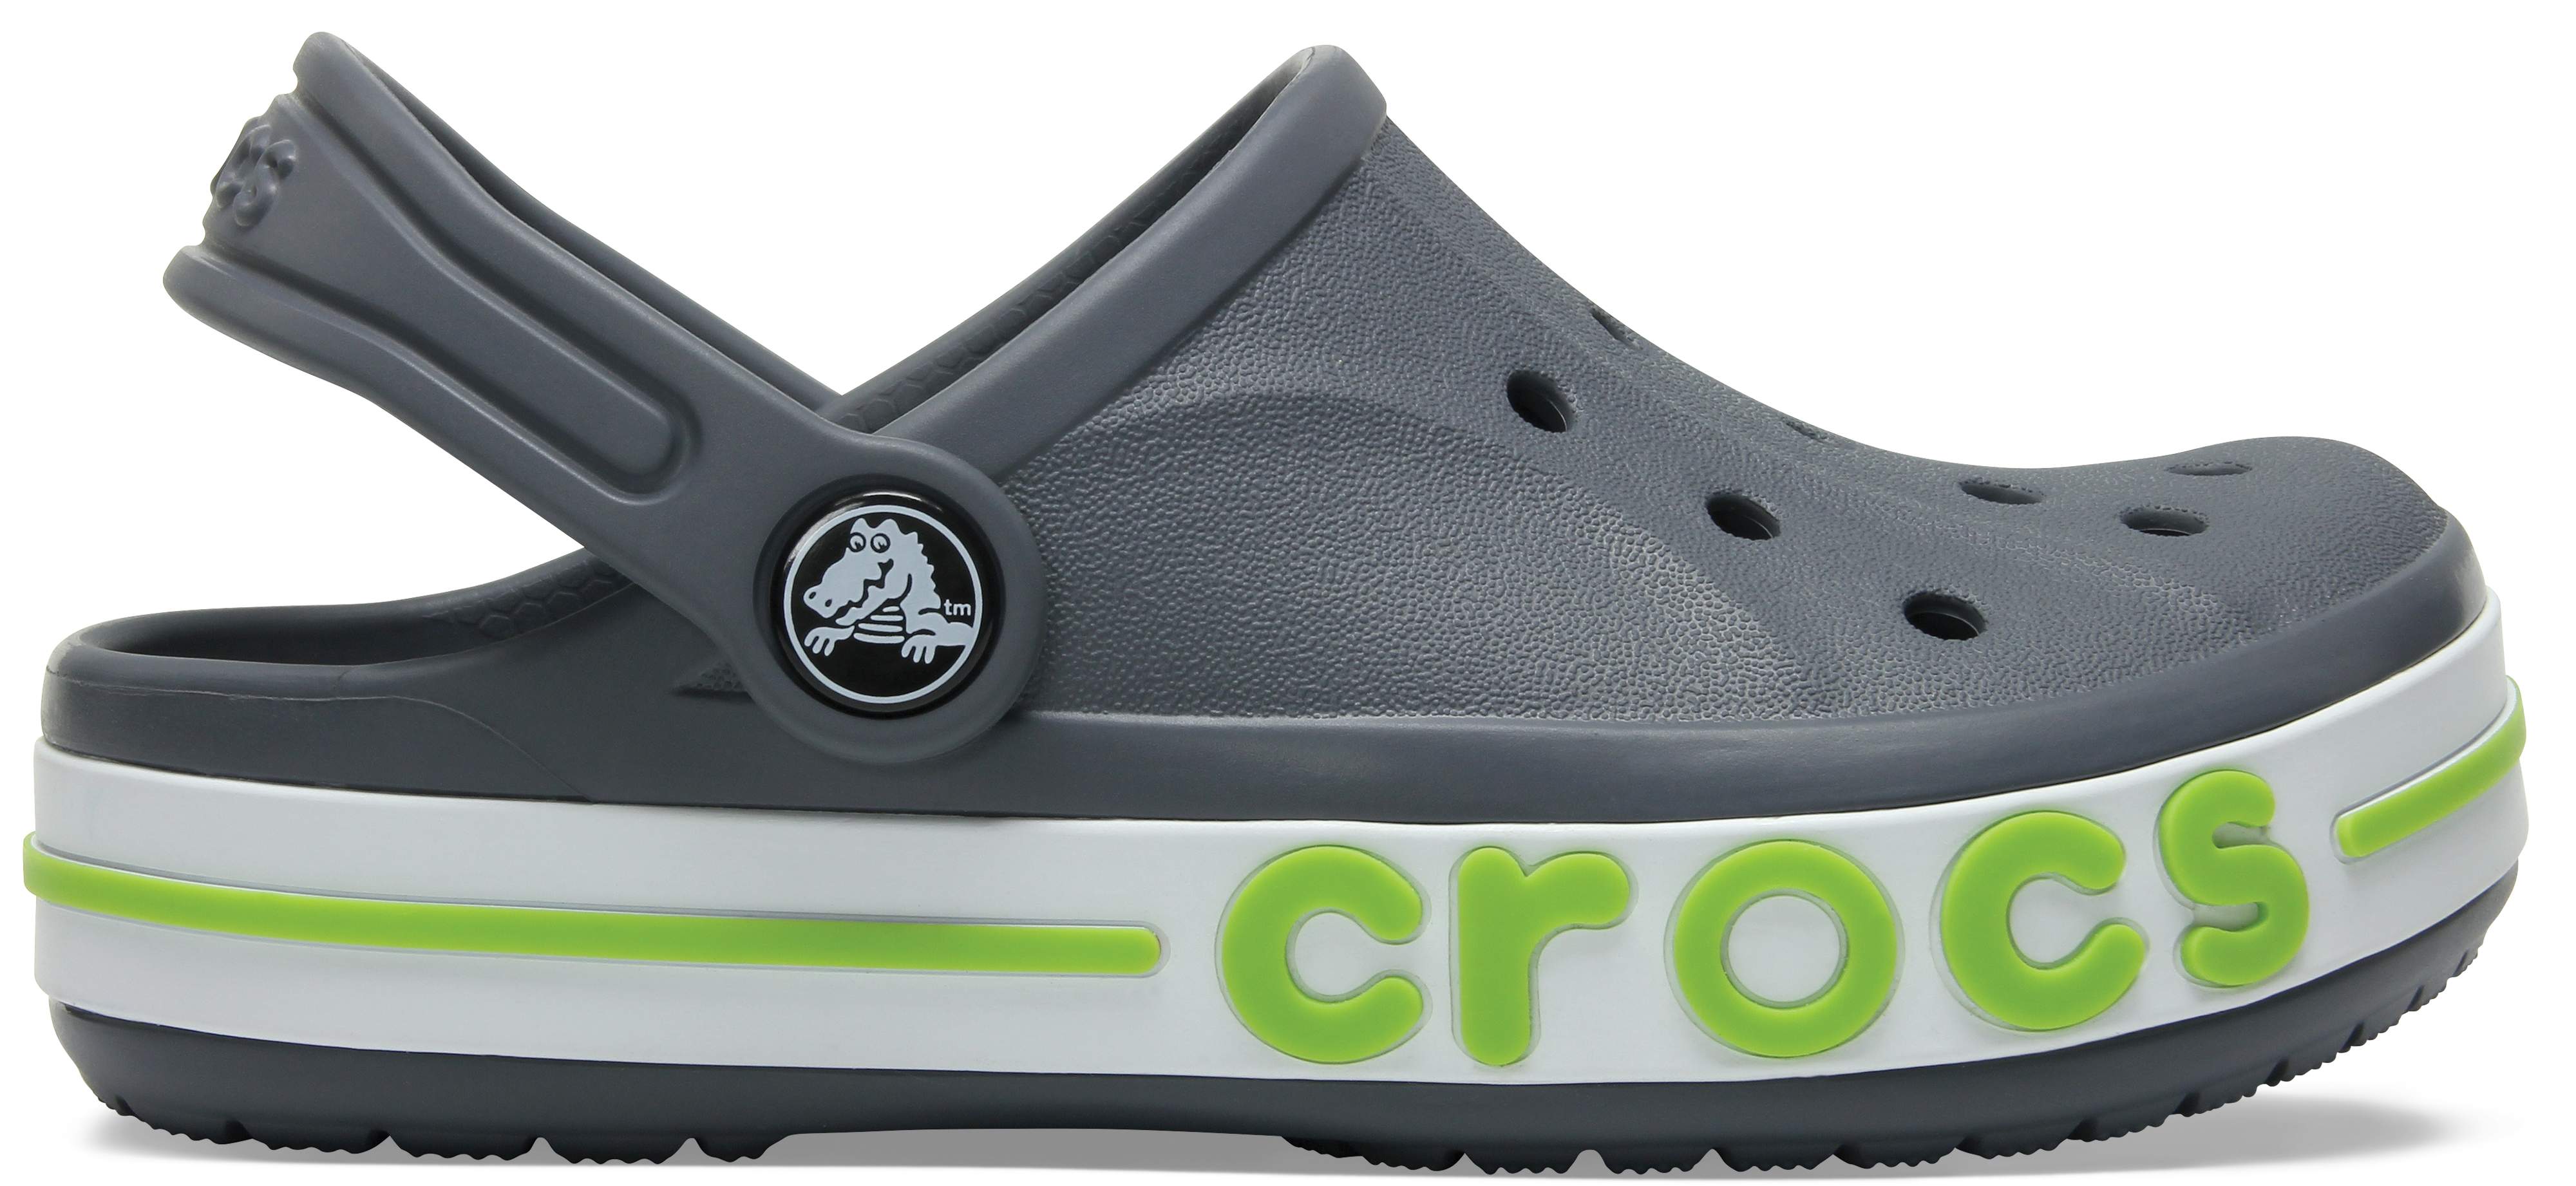 croc sale 2 for 35